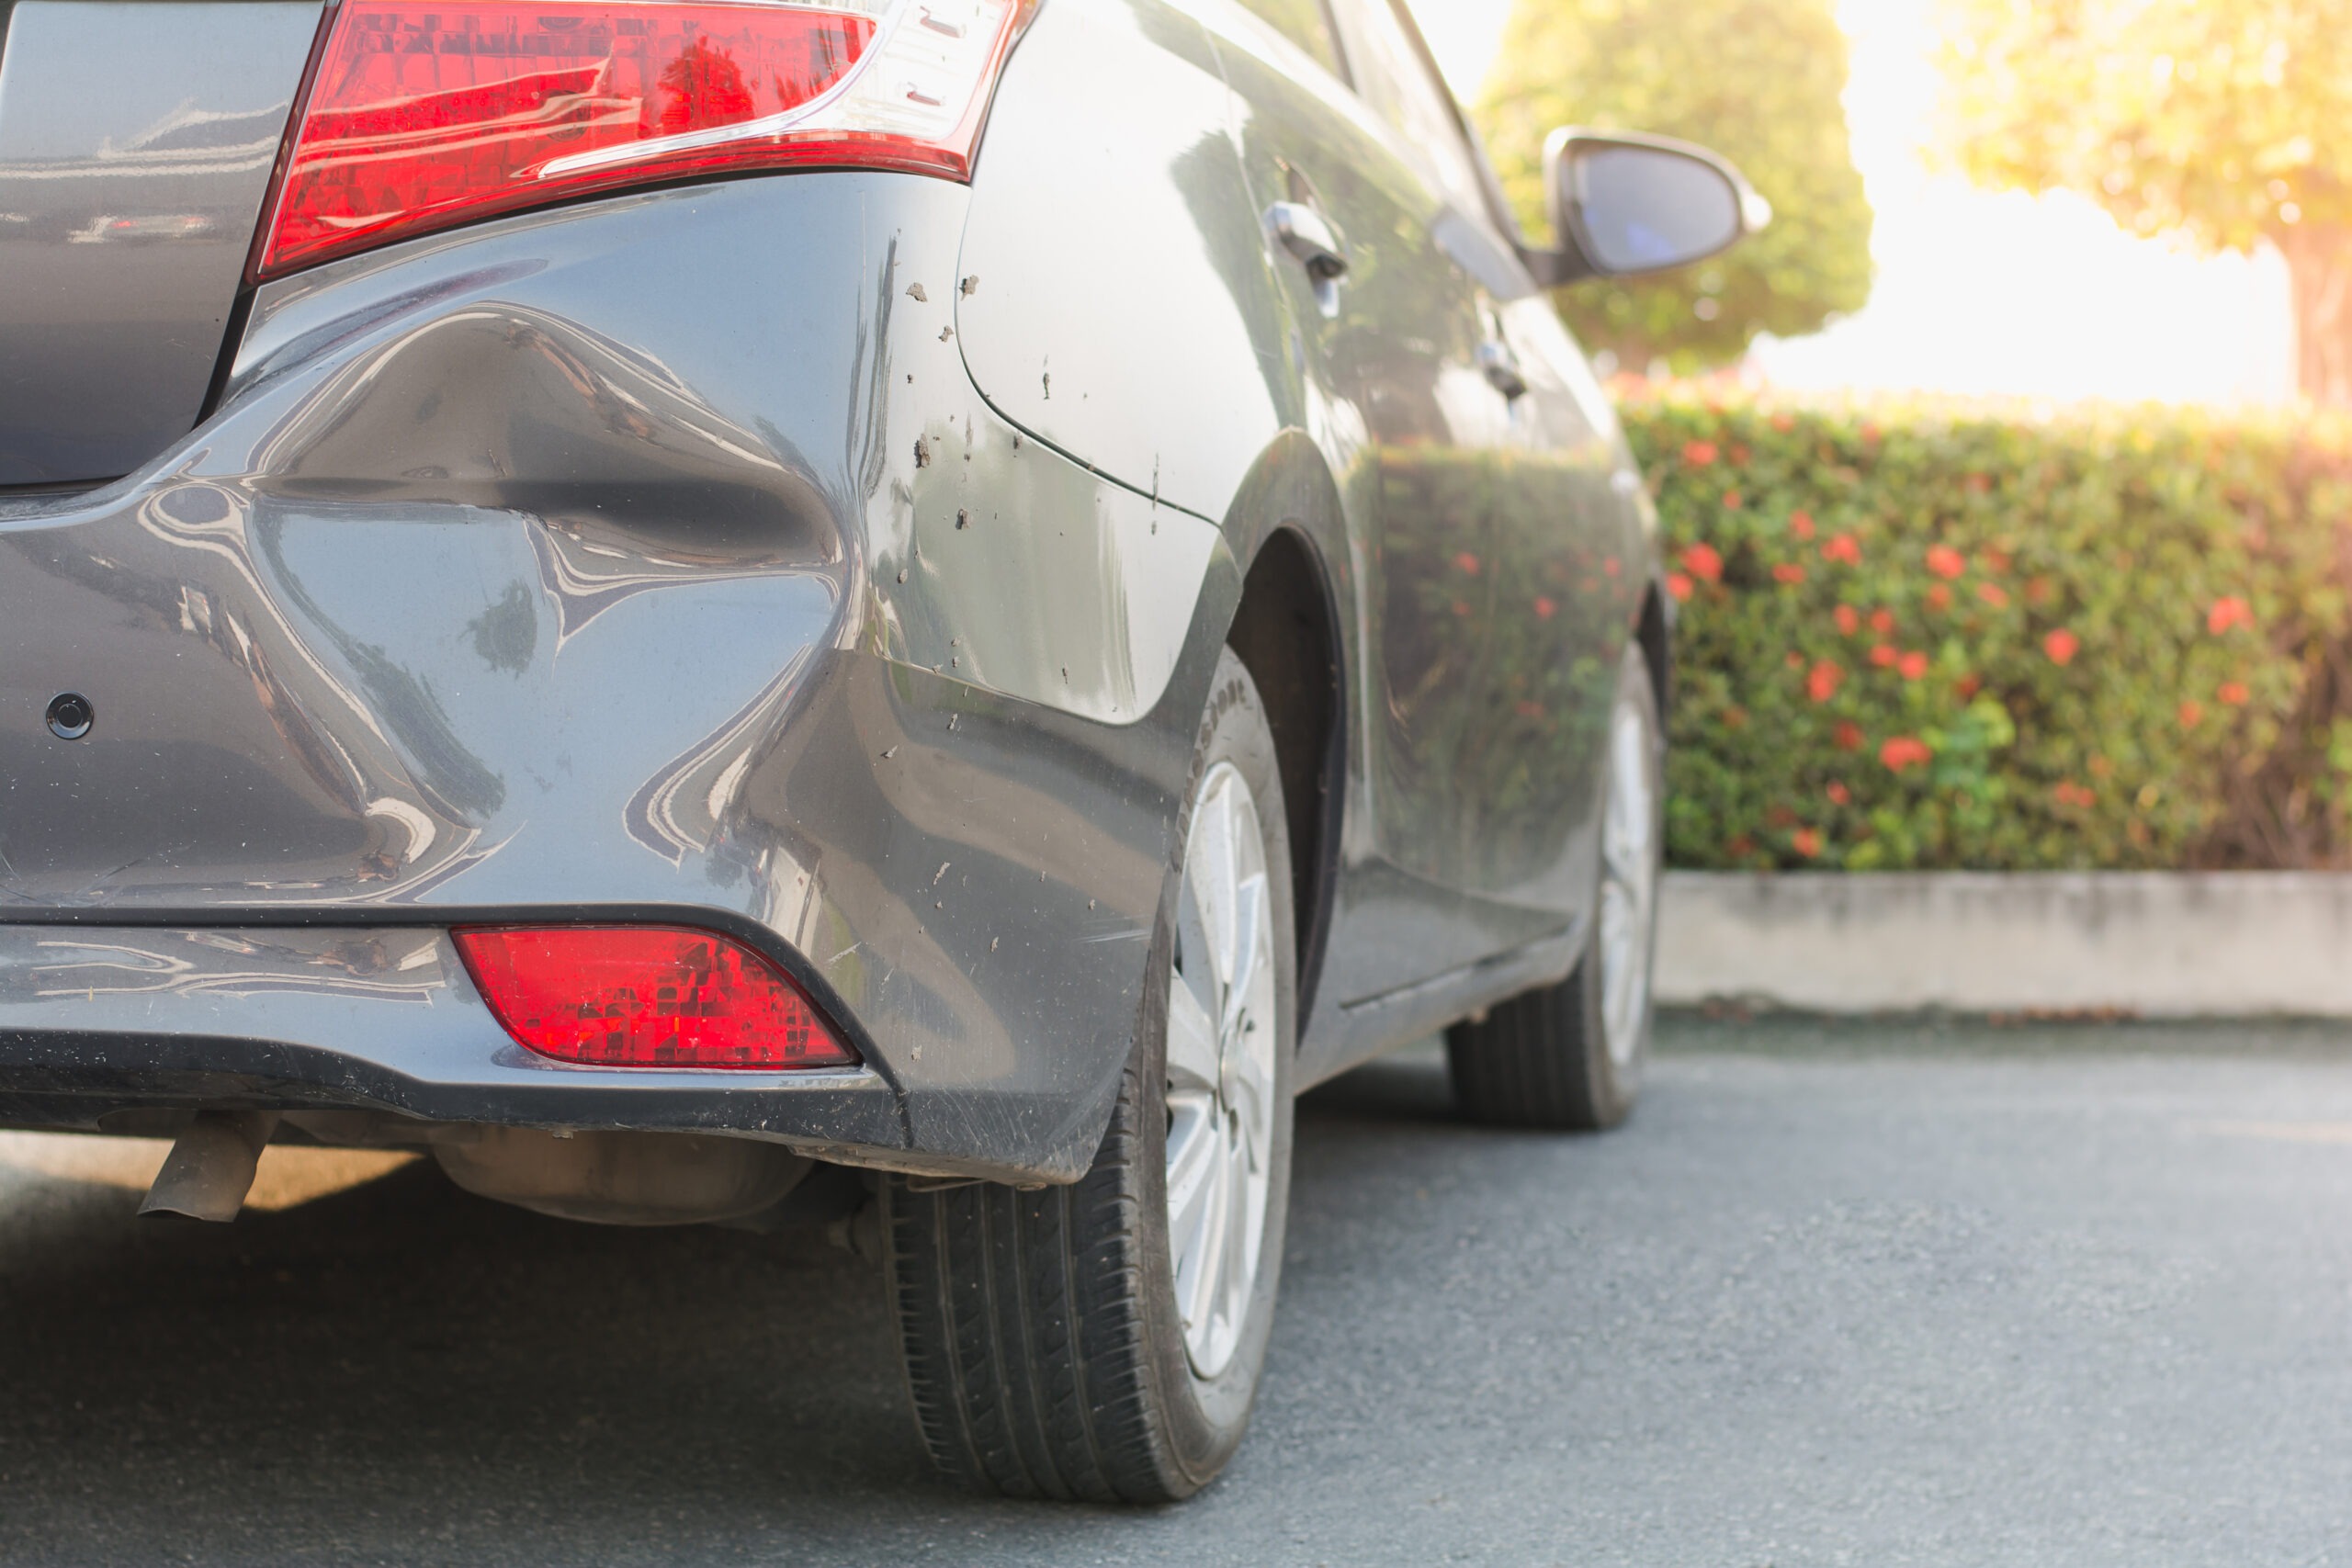 How Will My Car Insurance Be Affected in a Hit and Run Accident?